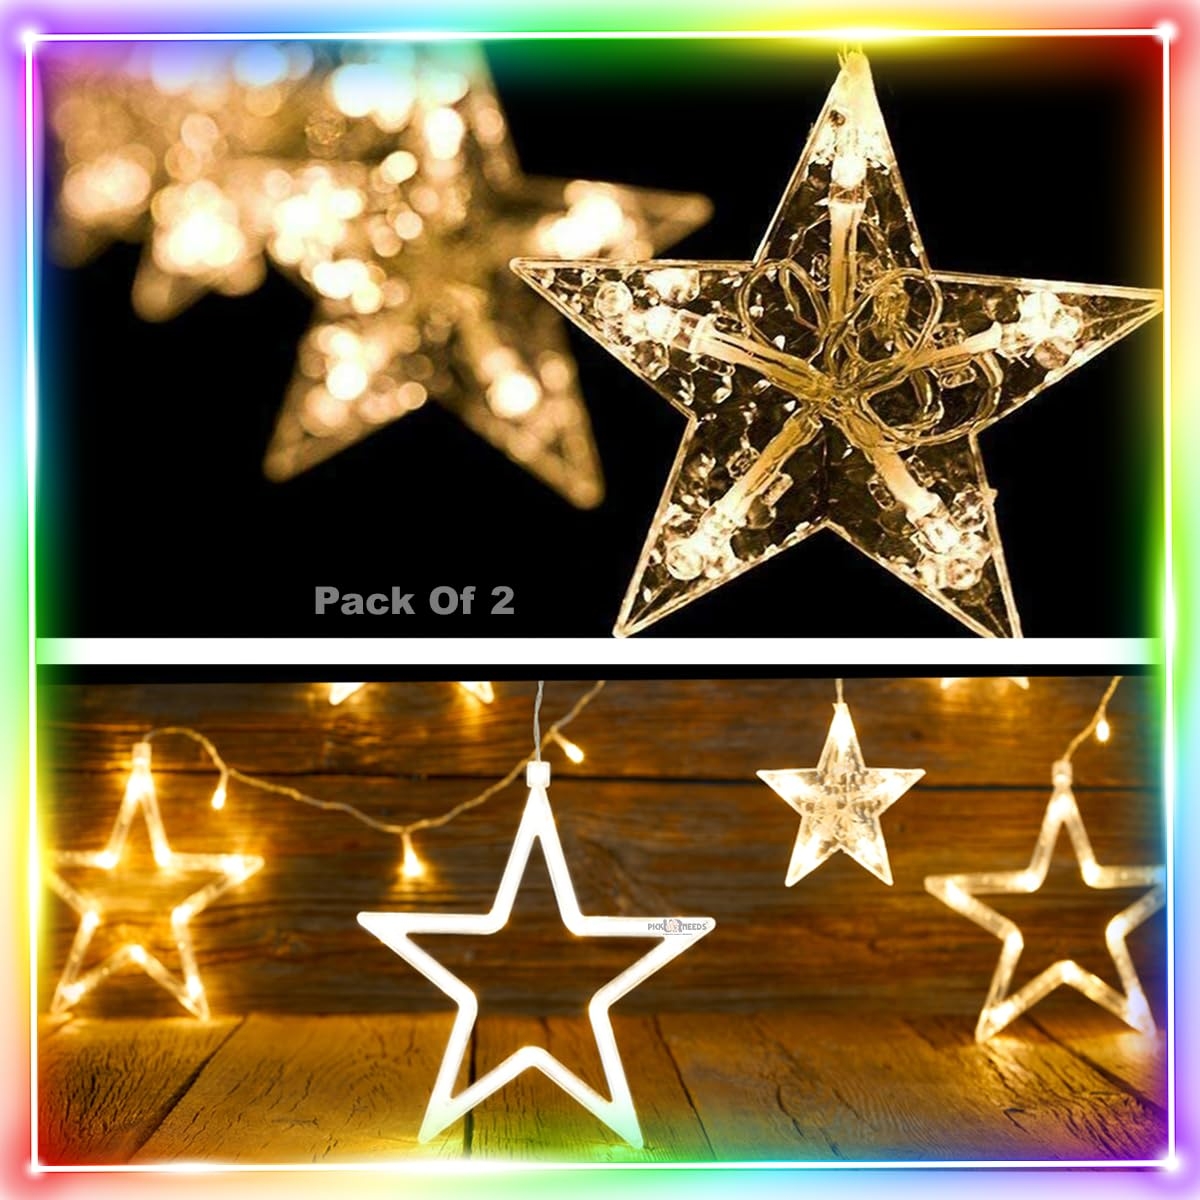 Pick Ur Needs Mini Stage Lighting Sound Activated Laser Projector with Mini Tripod Stand for Party and Diwali Decoration (Multicolor) (Star LED LIght Pack 2) LED Light strips